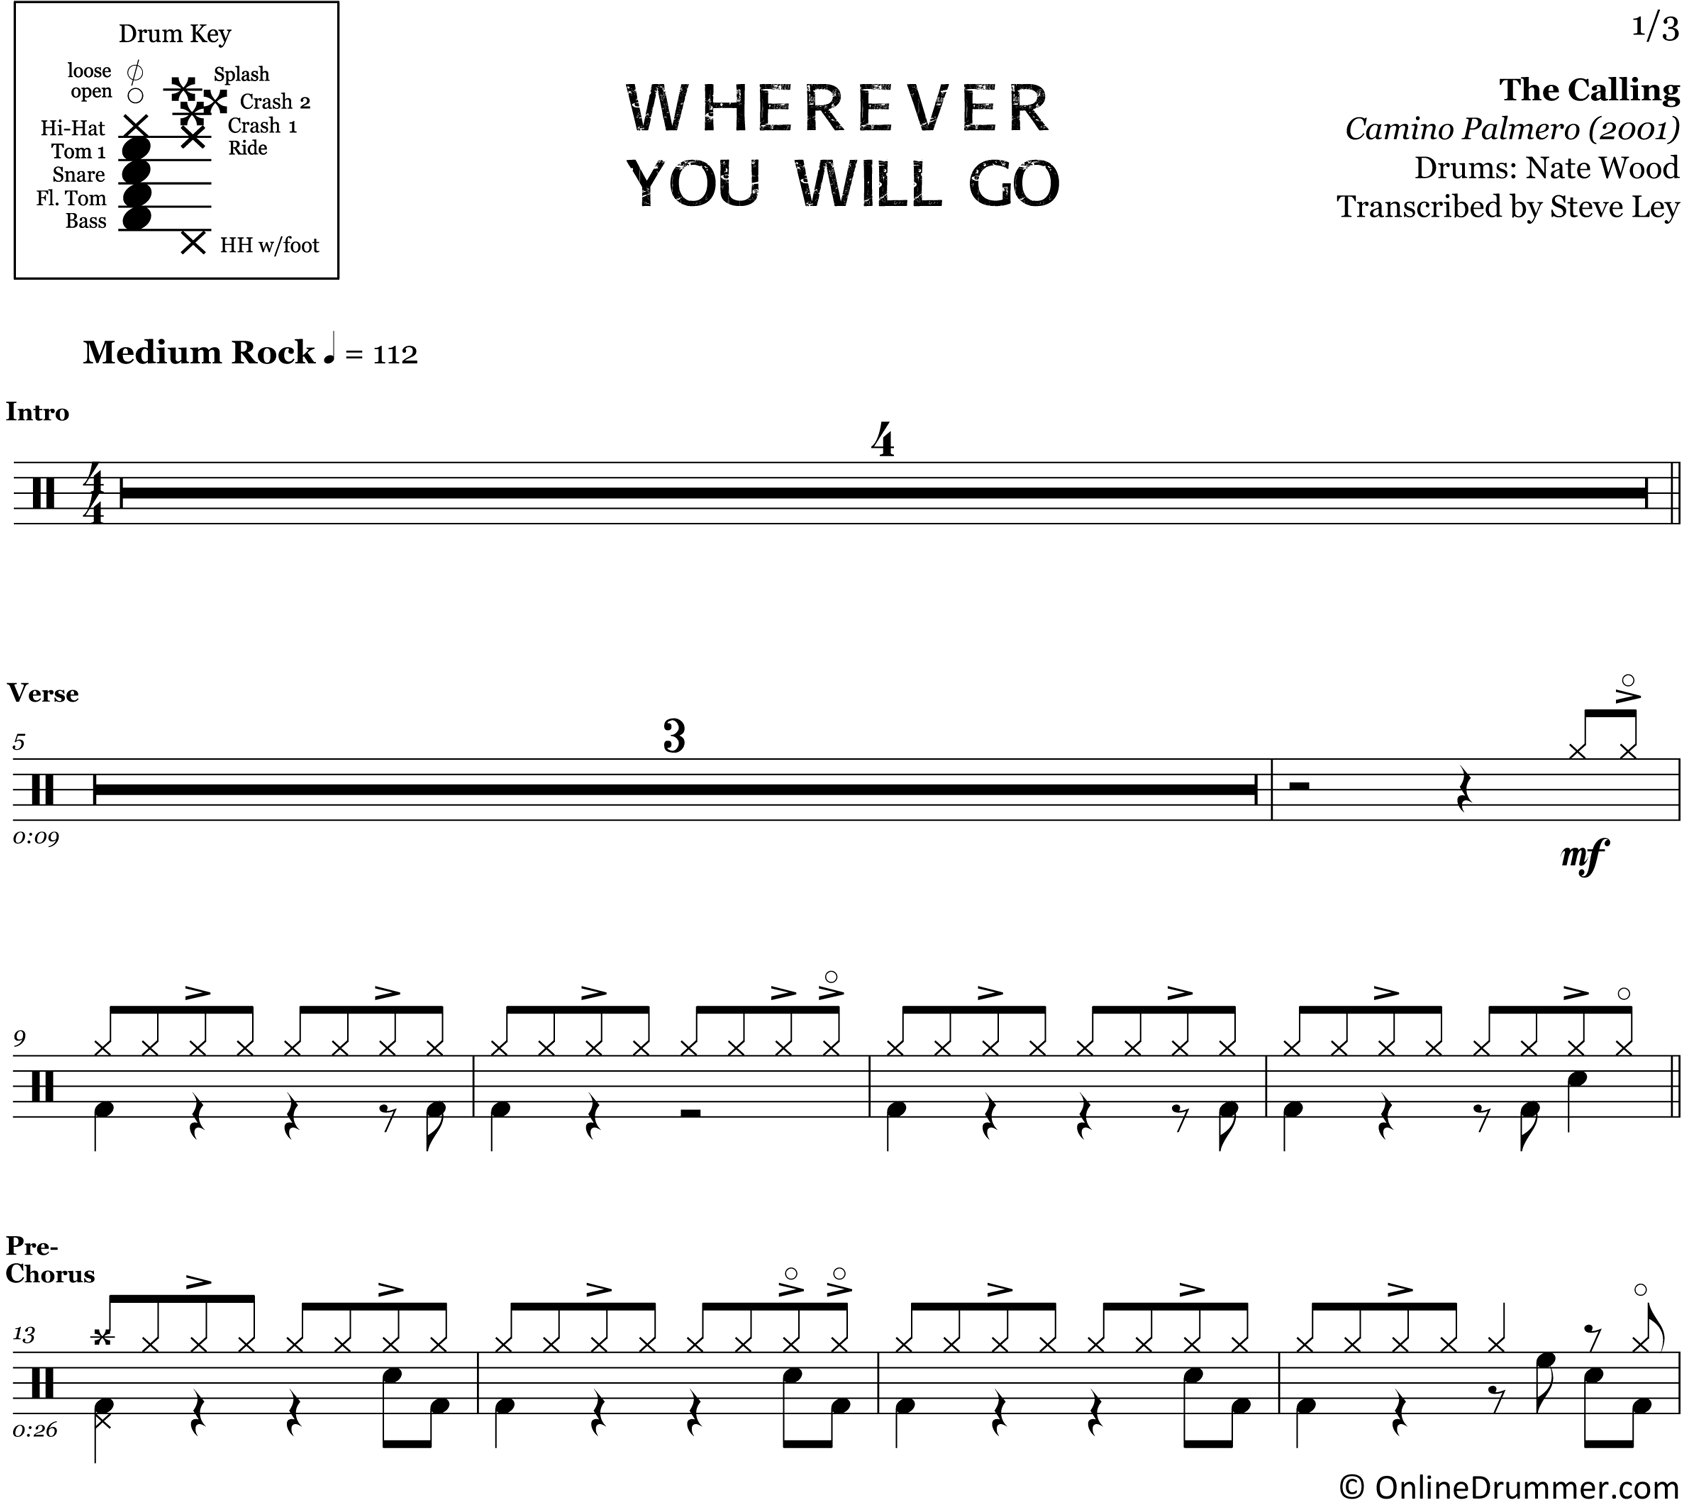 Wherever You Will Go - The Calling - Drum Sheet Music